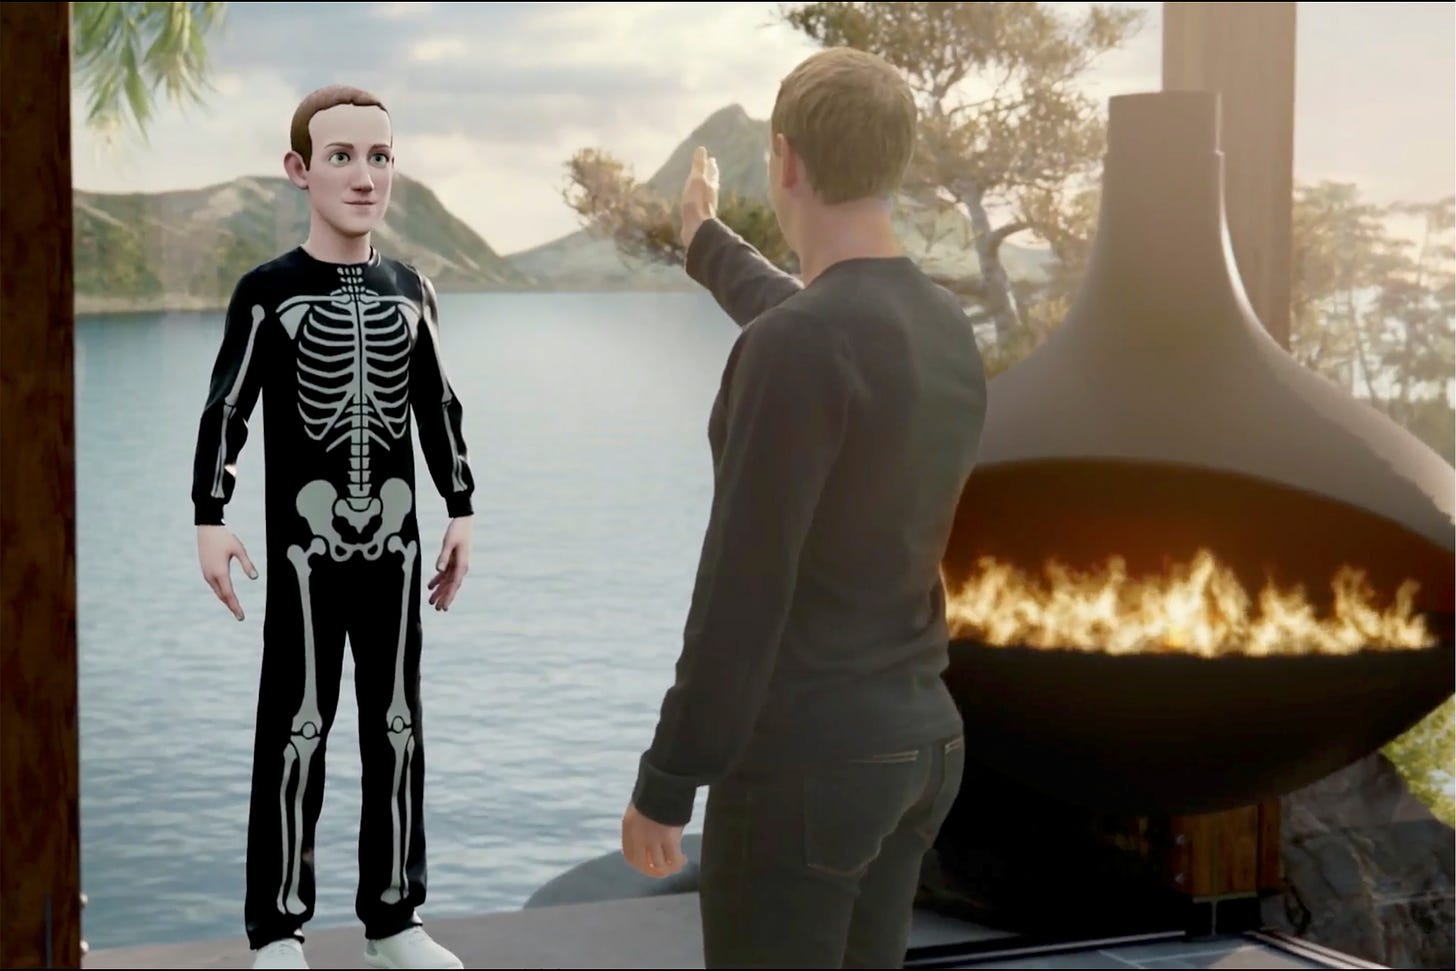 Facebook CEO Mark Zuckerberg speaks to an avatar of himself in the 'Metaverse' during Thursday's Facebook Connect showcase